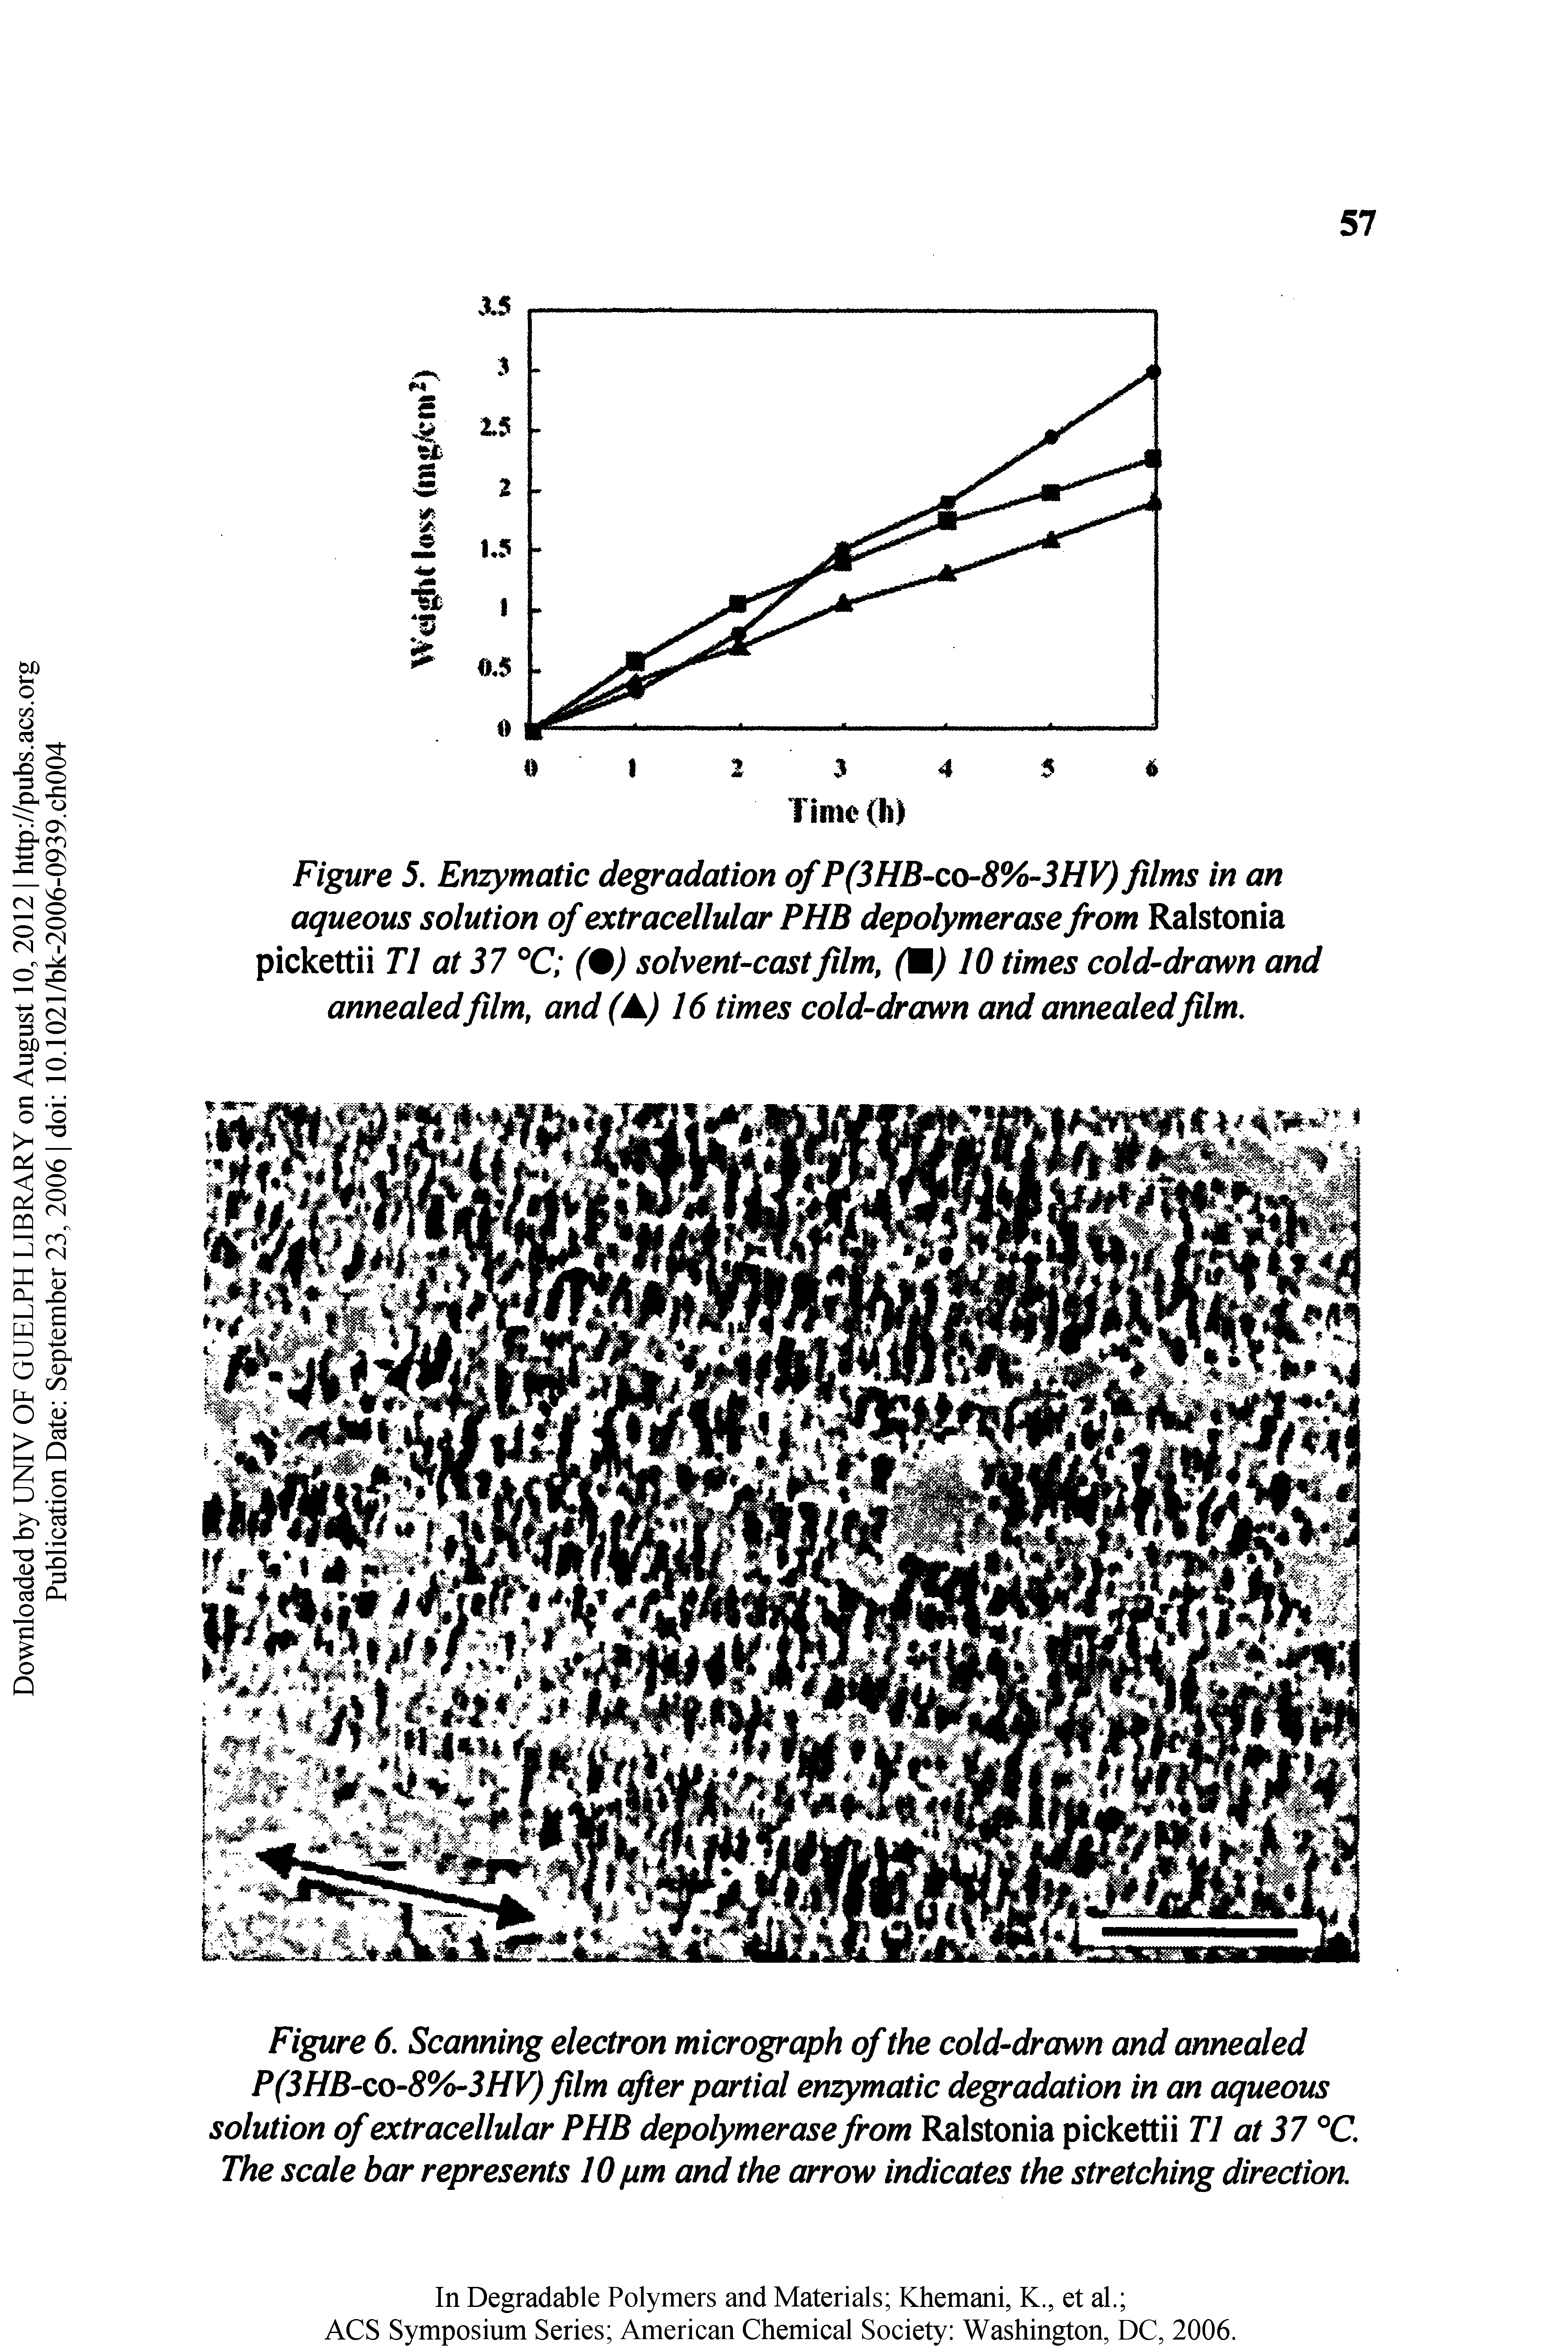 Figure 5. EnzymcUic degradation ofP(3HB-co-8%-3HV) film in an aqueous solution of extracellular PHB depolymerase from Ralstonia pickettii T1 at 37 °C (9) solvent-castfilm, (M) 10 times cold-drawn and annealed film, and ( ) 16 times cold-drawn and annealed film.